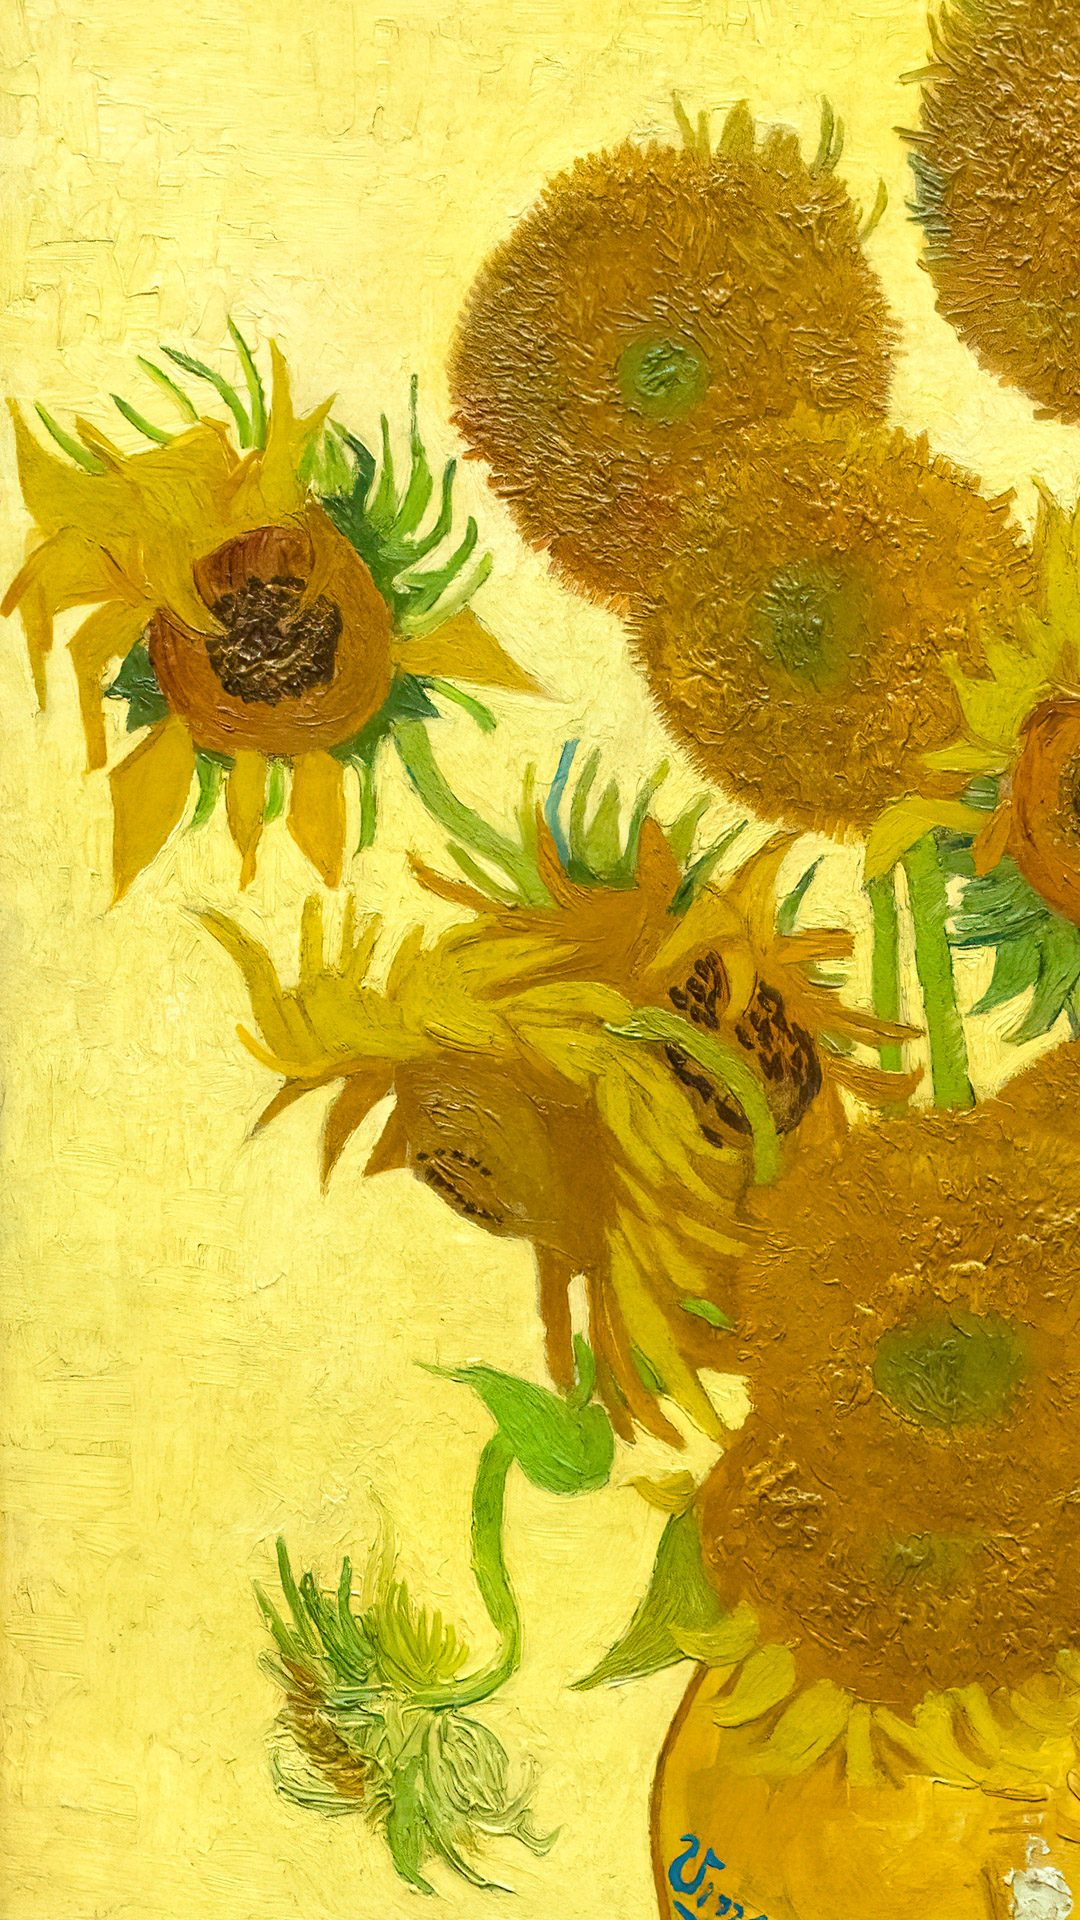 Bathe your iPhone in the warm glow of Vincent van Gogh's Sunflowers with our captivating wallpaper collection.